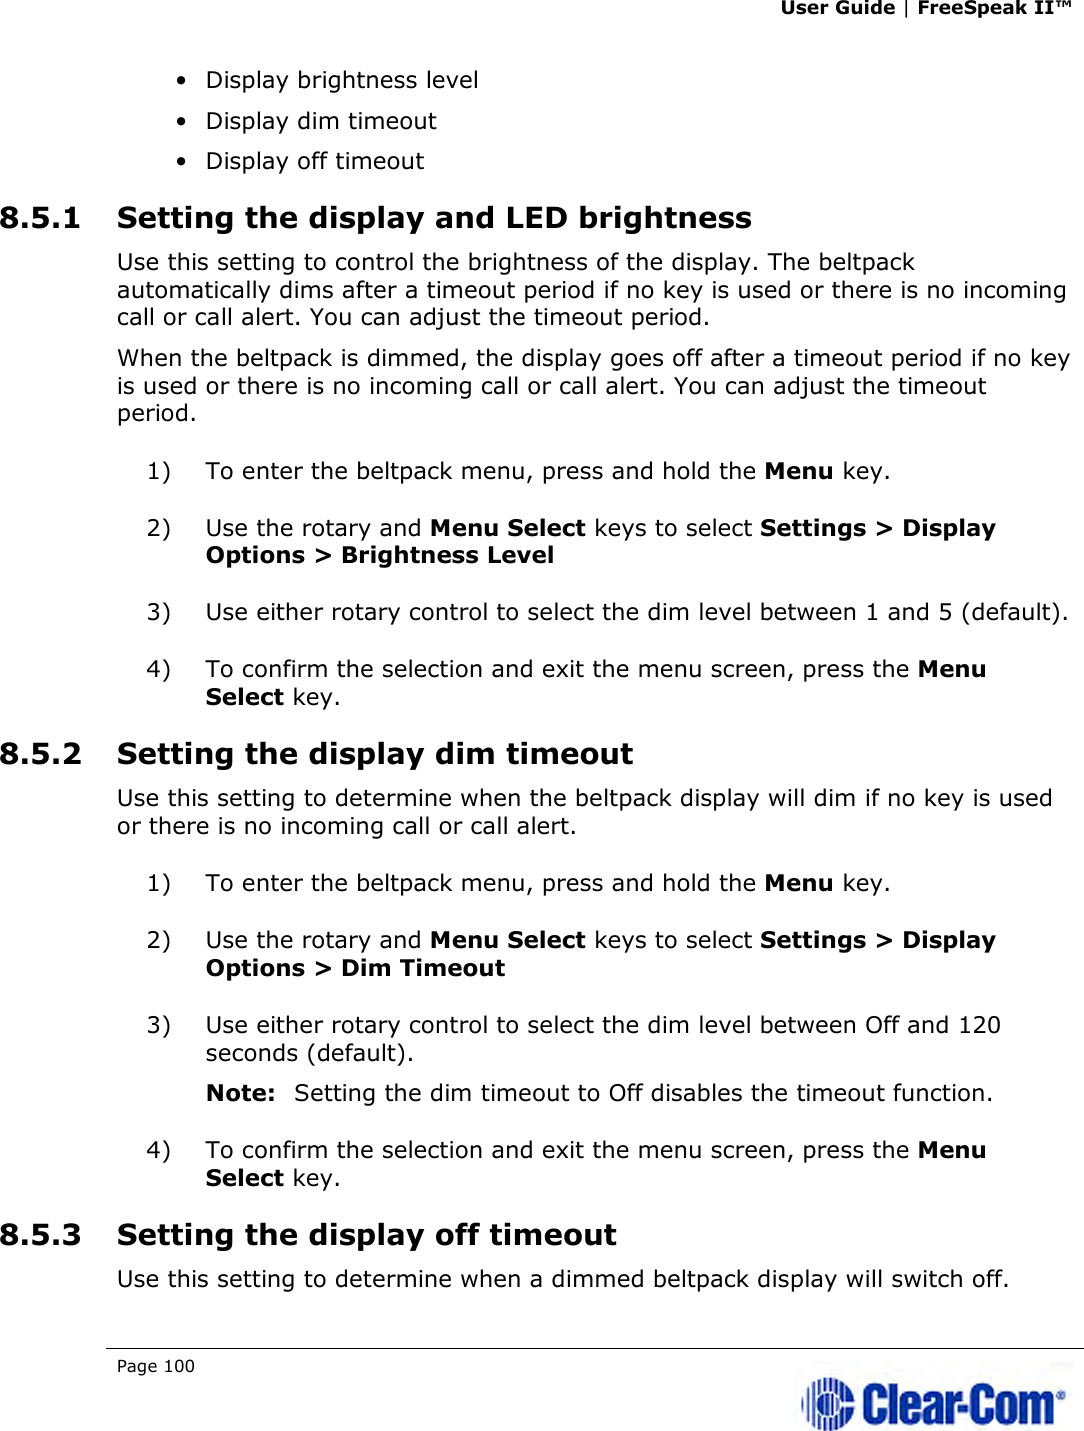 User Guide | FreeSpeak II™  Page 100   • Display brightness level • Display dim timeout • Display off timeout 8.5.1 Setting the display and LED brightness Use this setting to control the brightness of the display. The beltpack automatically dims after a timeout period if no key is used or there is no incoming call or call alert. You can adjust the timeout period. When the beltpack is dimmed, the display goes off after a timeout period if no key is used or there is no incoming call or call alert. You can adjust the timeout period. 1) To enter the beltpack menu, press and hold the Menu key. 2) Use the rotary and Menu Select keys to select Settings &gt; Display Options &gt; Brightness Level 3) Use either rotary control to select the dim level between 1 and 5 (default). 4) To confirm the selection and exit the menu screen, press the Menu Select key. 8.5.2 Setting the display dim timeout Use this setting to determine when the beltpack display will dim if no key is used or there is no incoming call or call alert. 1) To enter the beltpack menu, press and hold the Menu key. 2) Use the rotary and Menu Select keys to select Settings &gt; Display Options &gt; Dim Timeout 3) Use either rotary control to select the dim level between Off and 120 seconds (default). Note: Setting the dim timeout to Off disables the timeout function. 4) To confirm the selection and exit the menu screen, press the Menu Select key. 8.5.3 Setting the display off timeout Use this setting to determine when a dimmed beltpack display will switch off. 